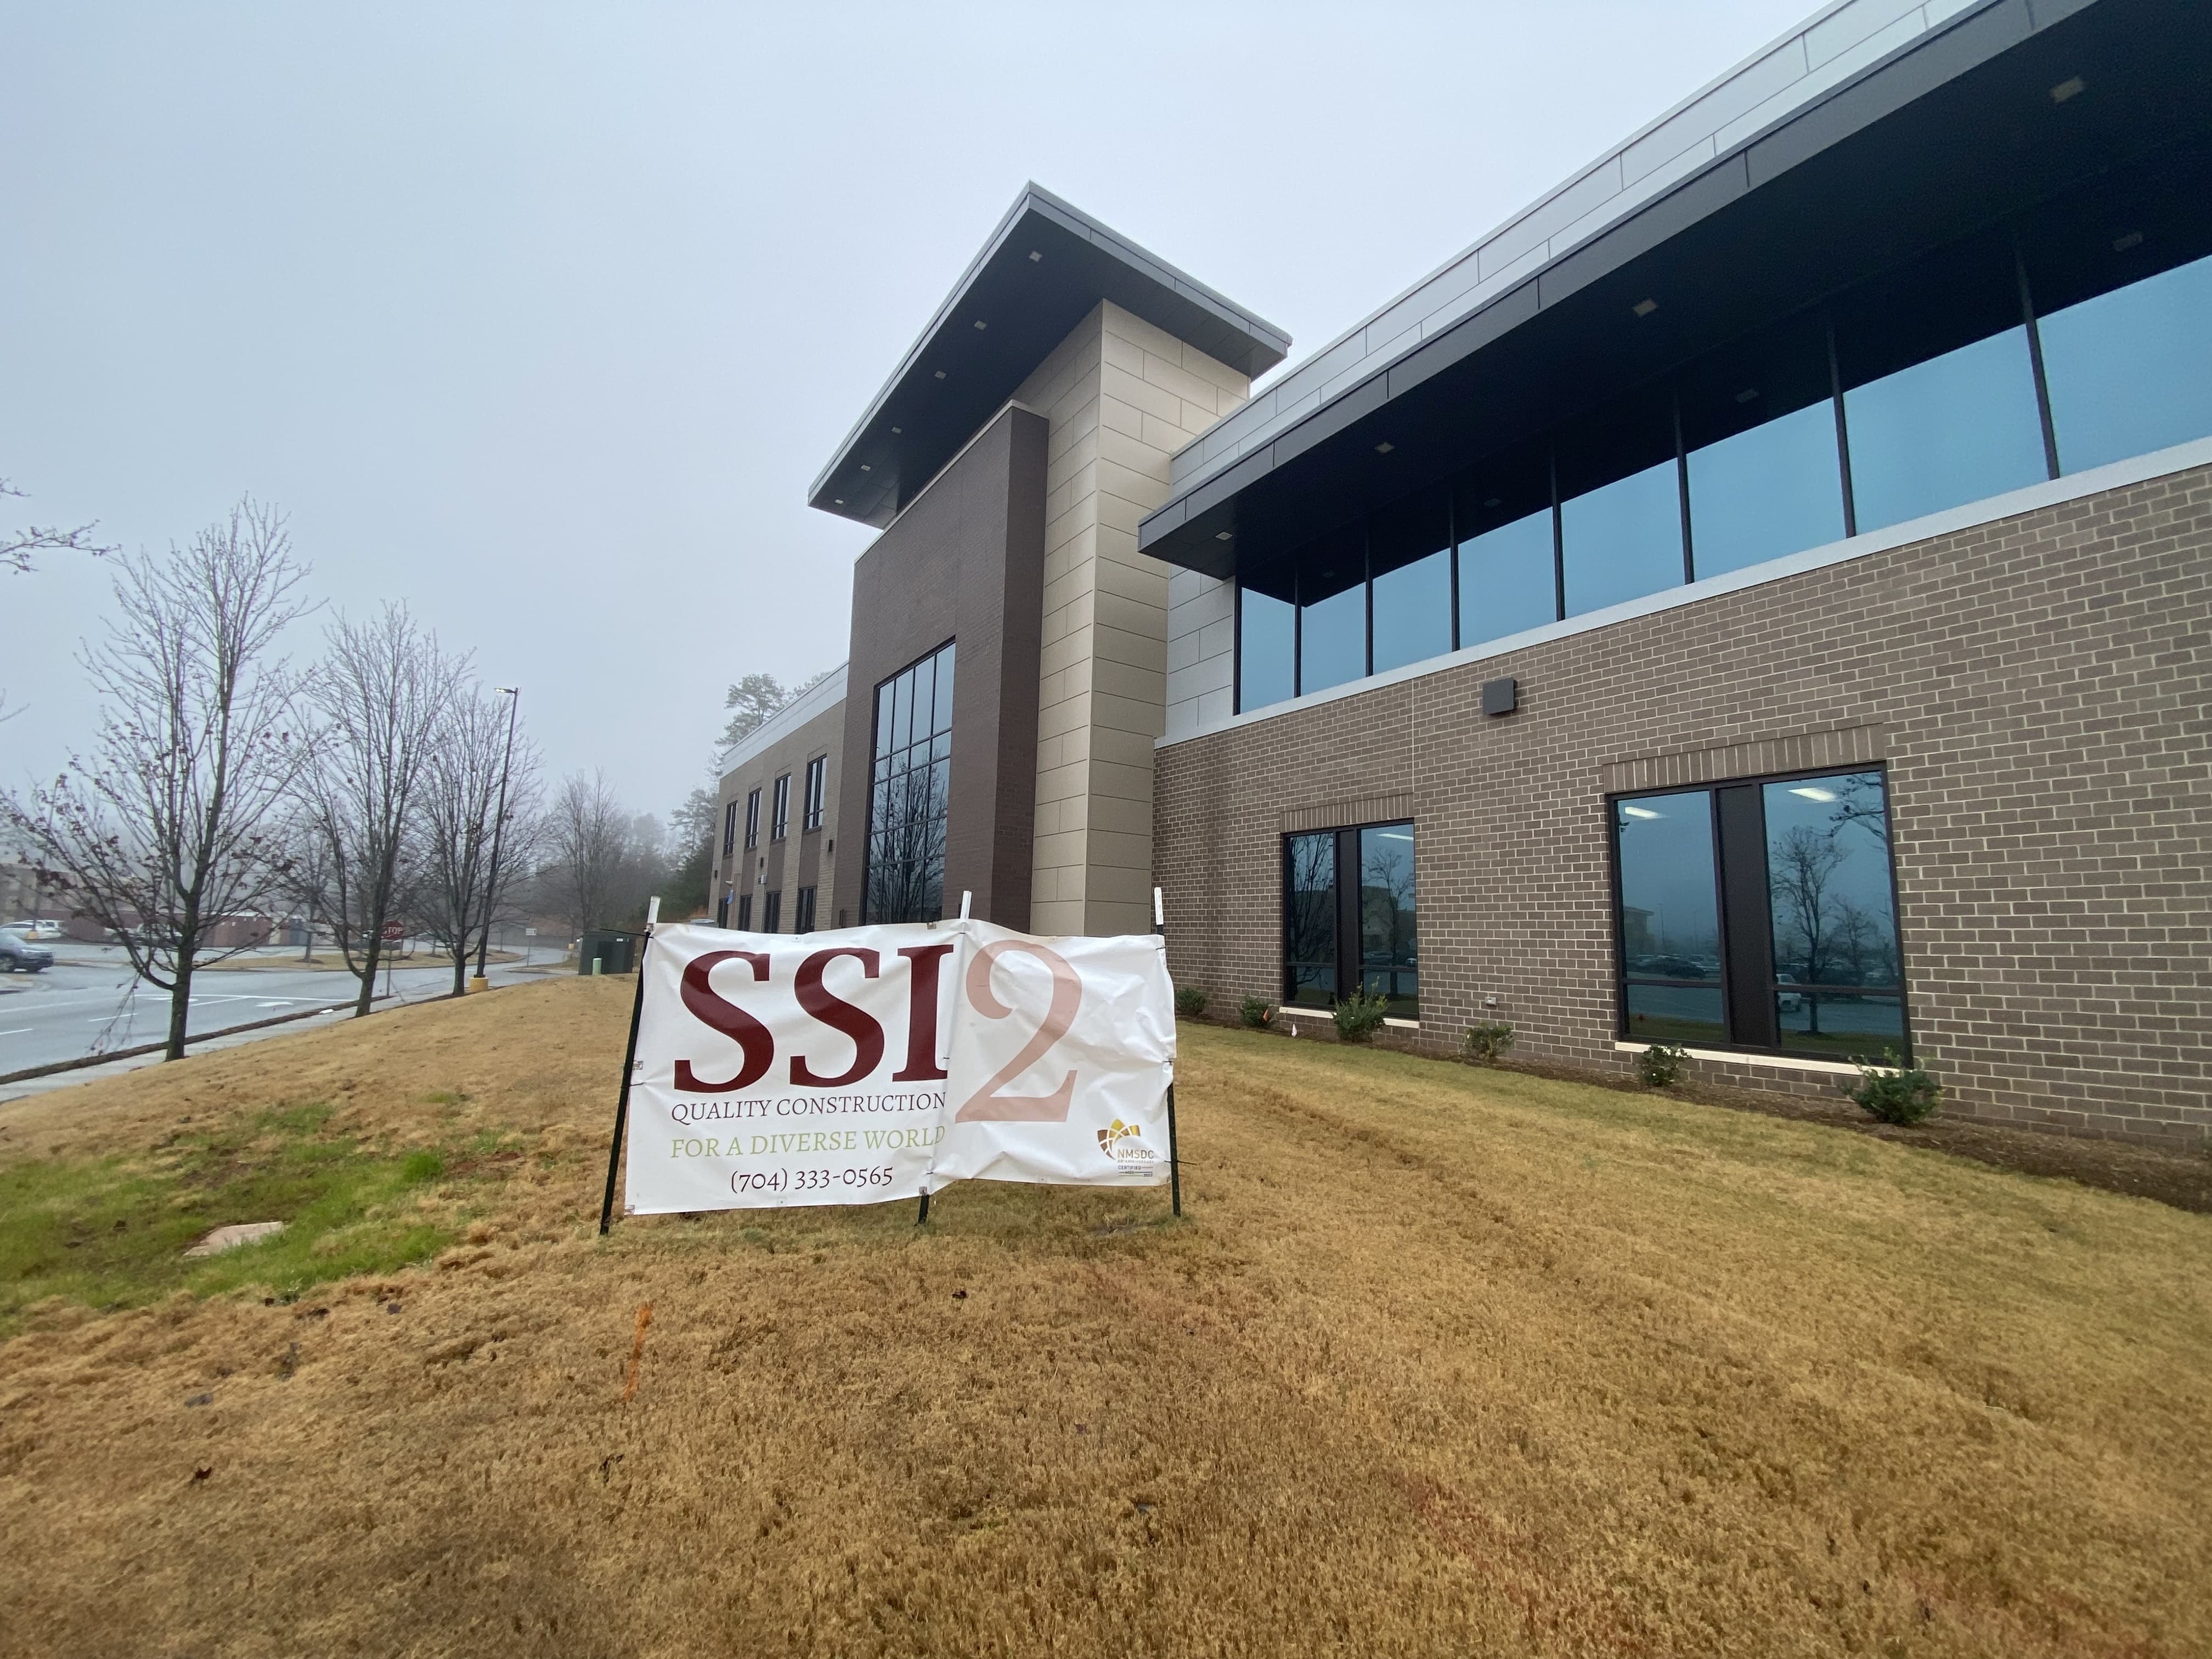 Pictured is SSI 2, a construction company started by Marshall Fitzgerald - an alumnus from UMD.